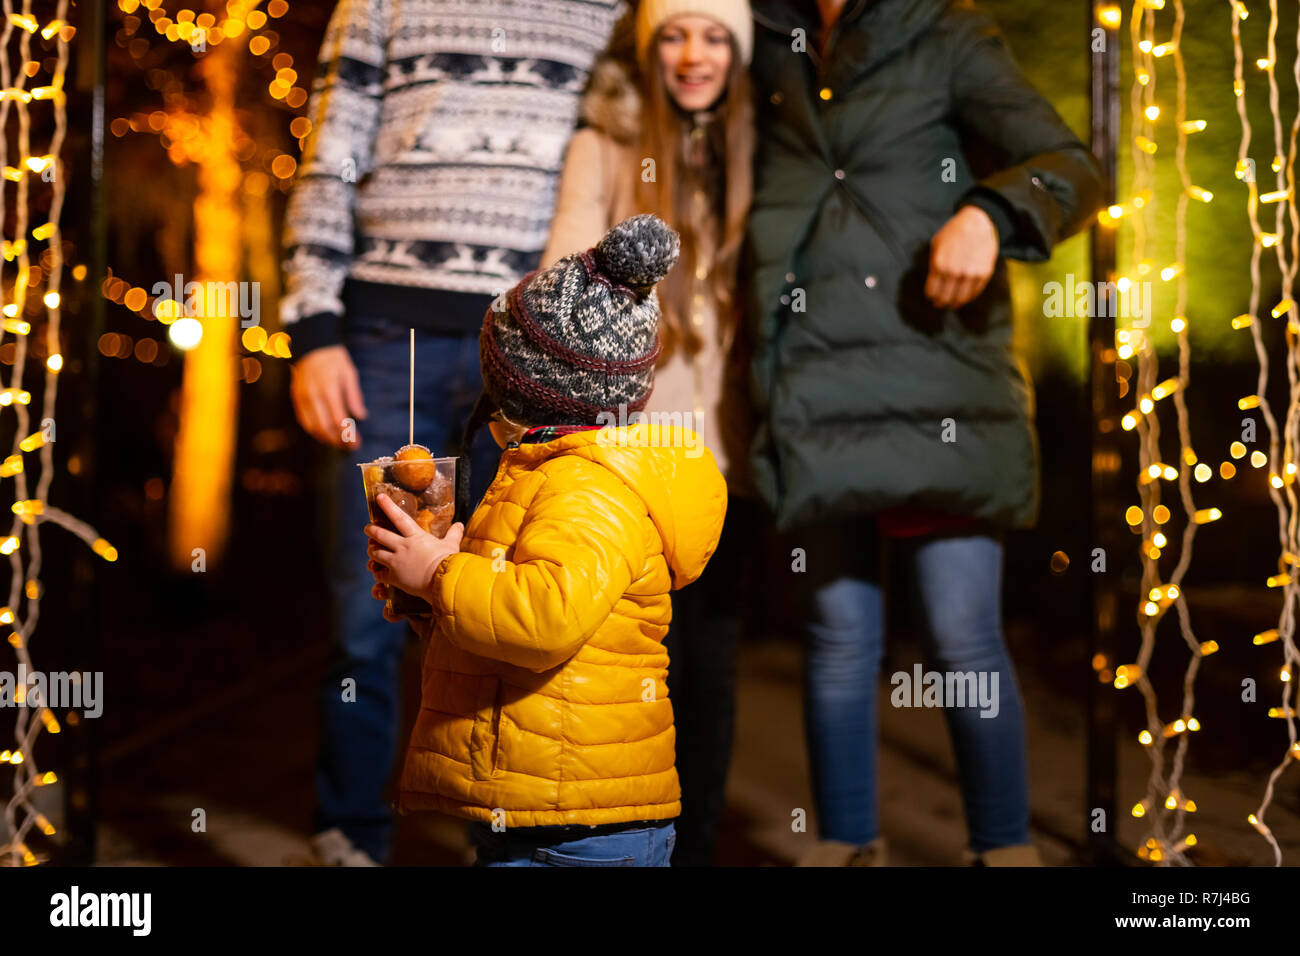 Young boy holding traditional food in frot of family at Christmas market, Zagreb, Croacia. Stock Photo